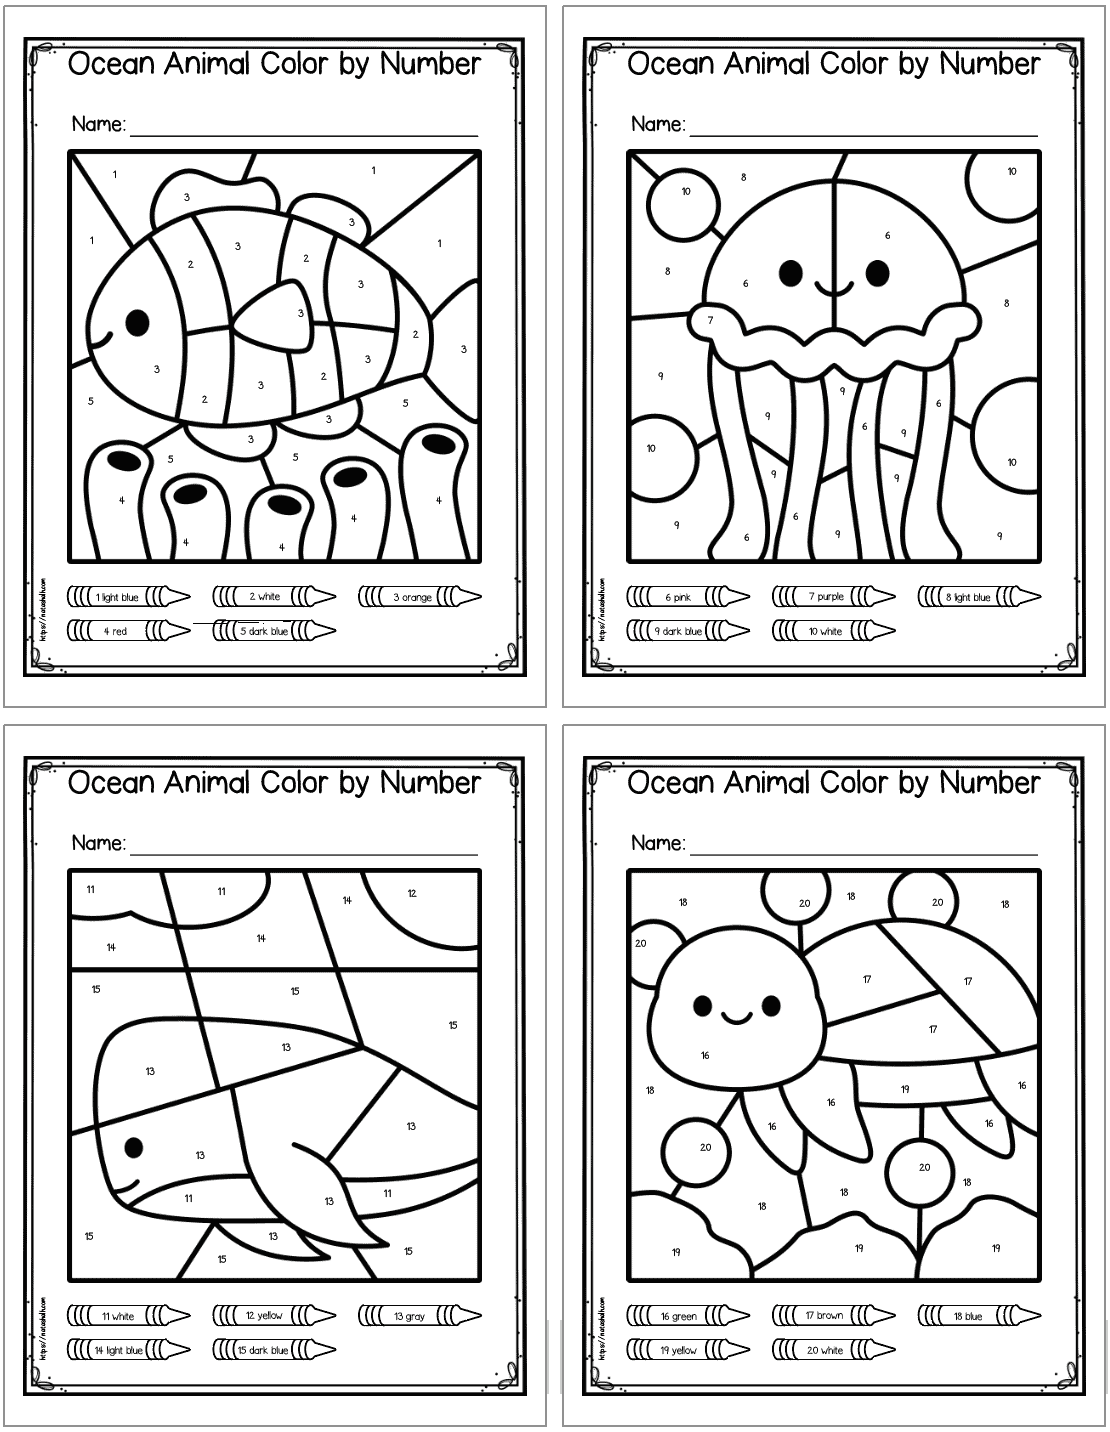 Four color by number pages. They show: a clownfish, a jellyfish, a shark, and a turtle